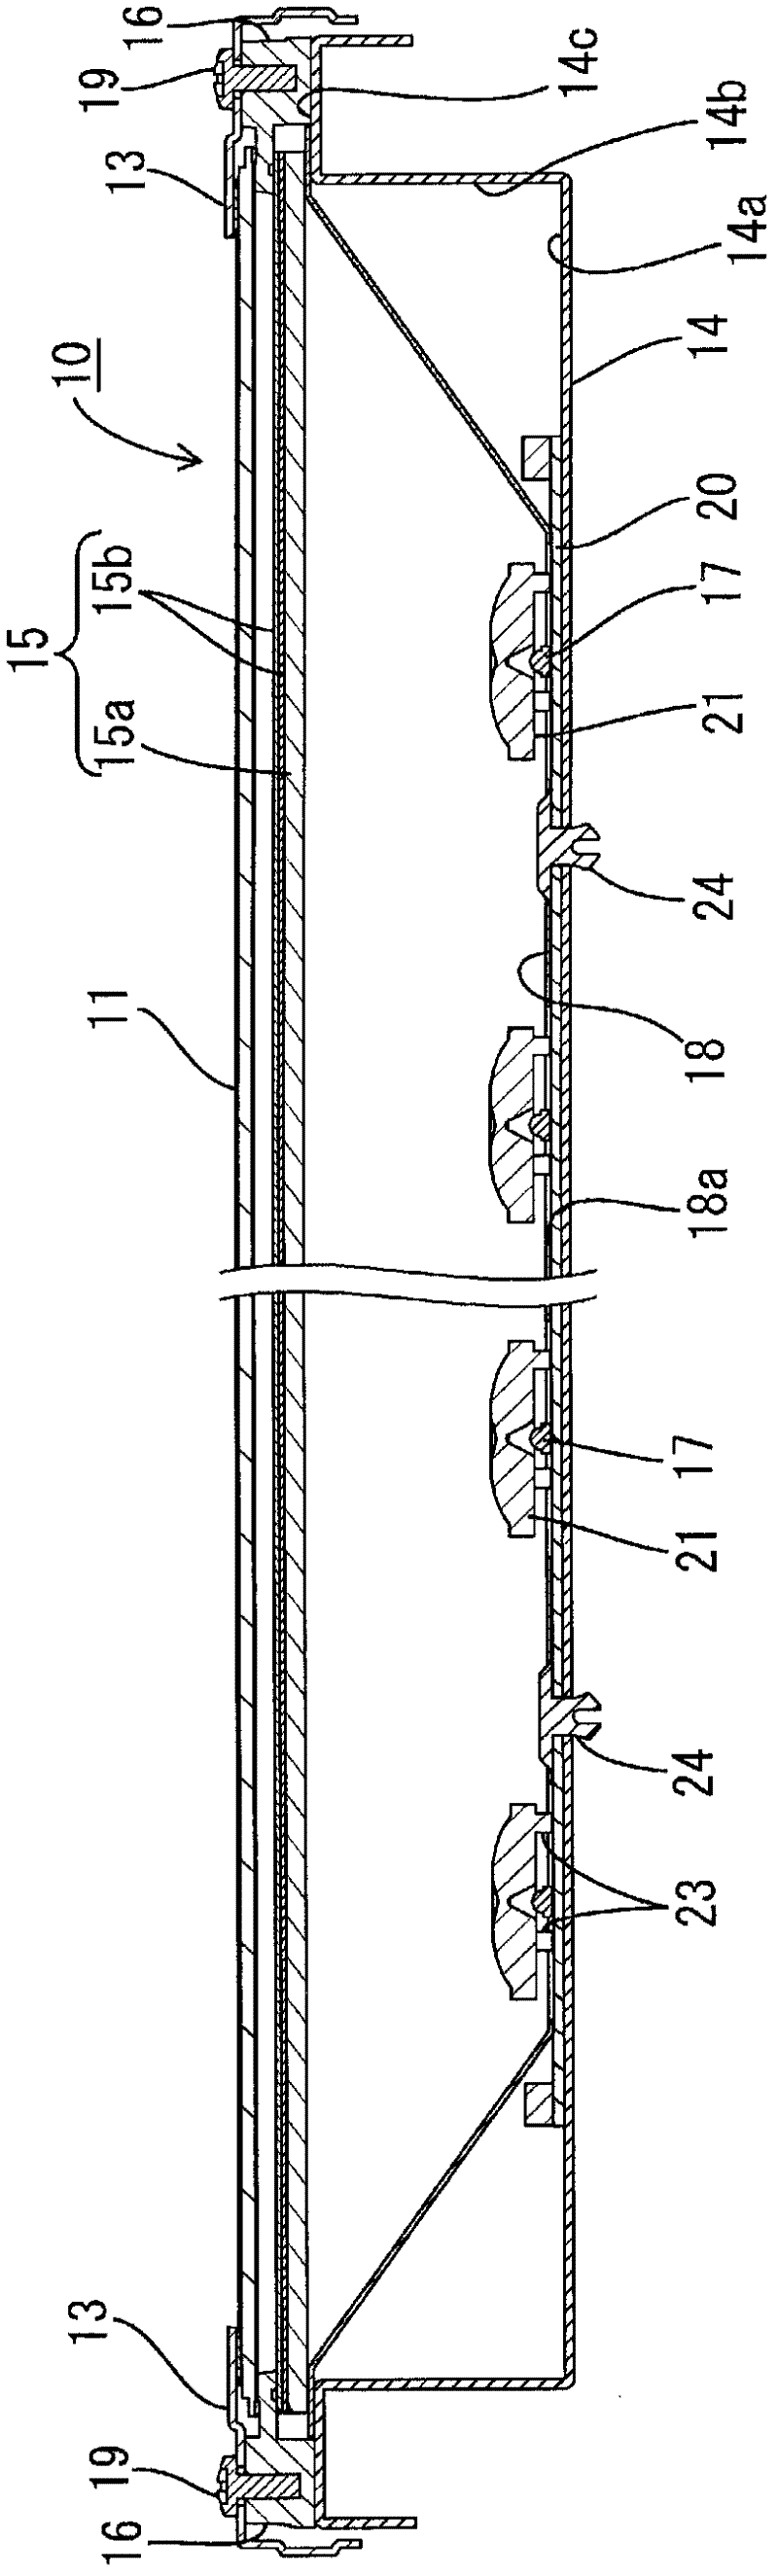 Illumination device, display device, and television receiver